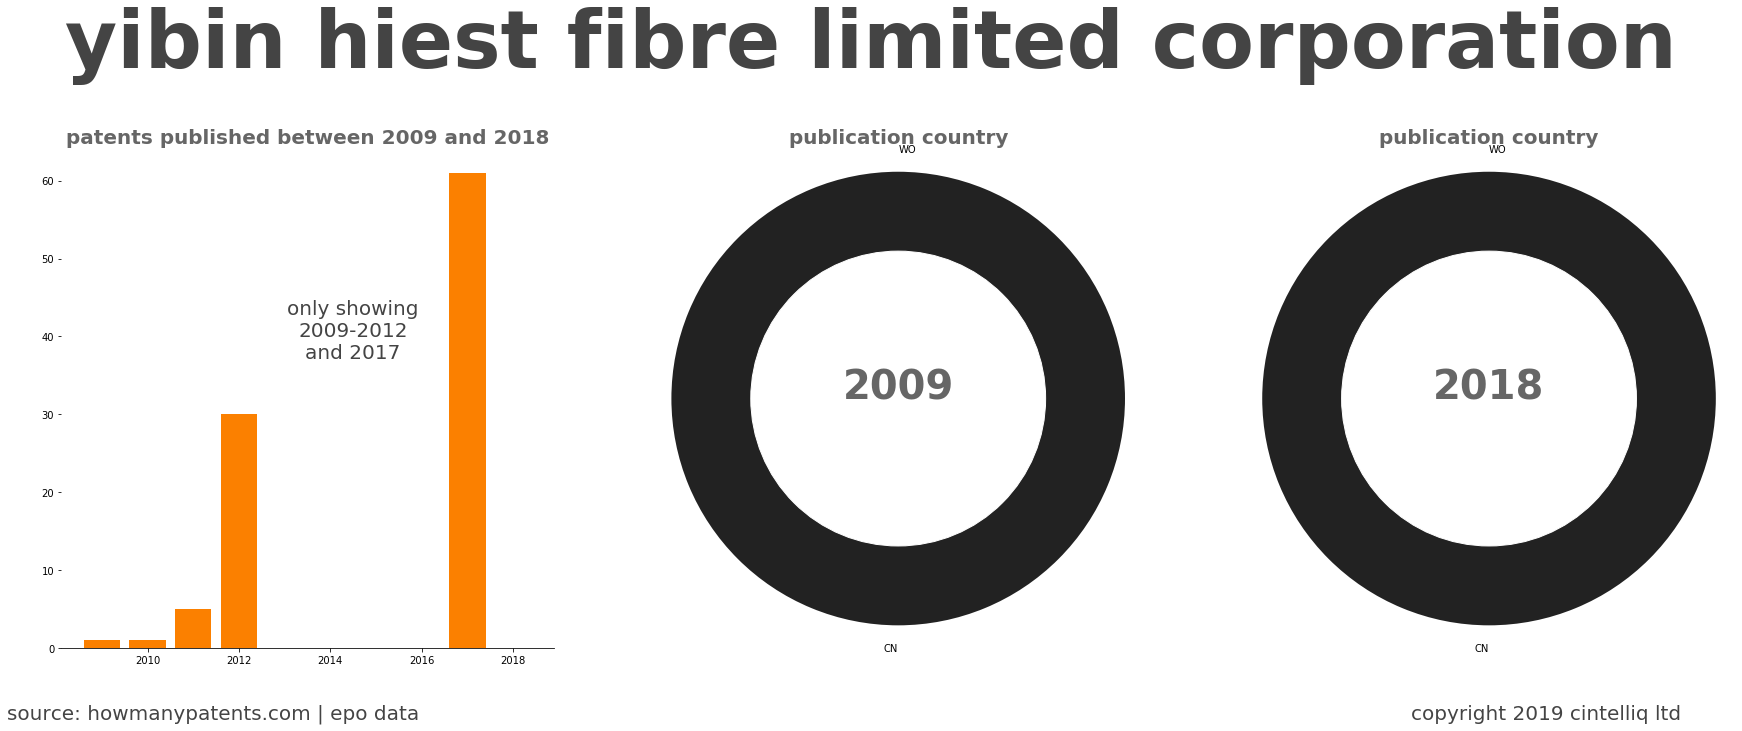 summary of patents for Yibin Hiest Fibre Limited Corporation